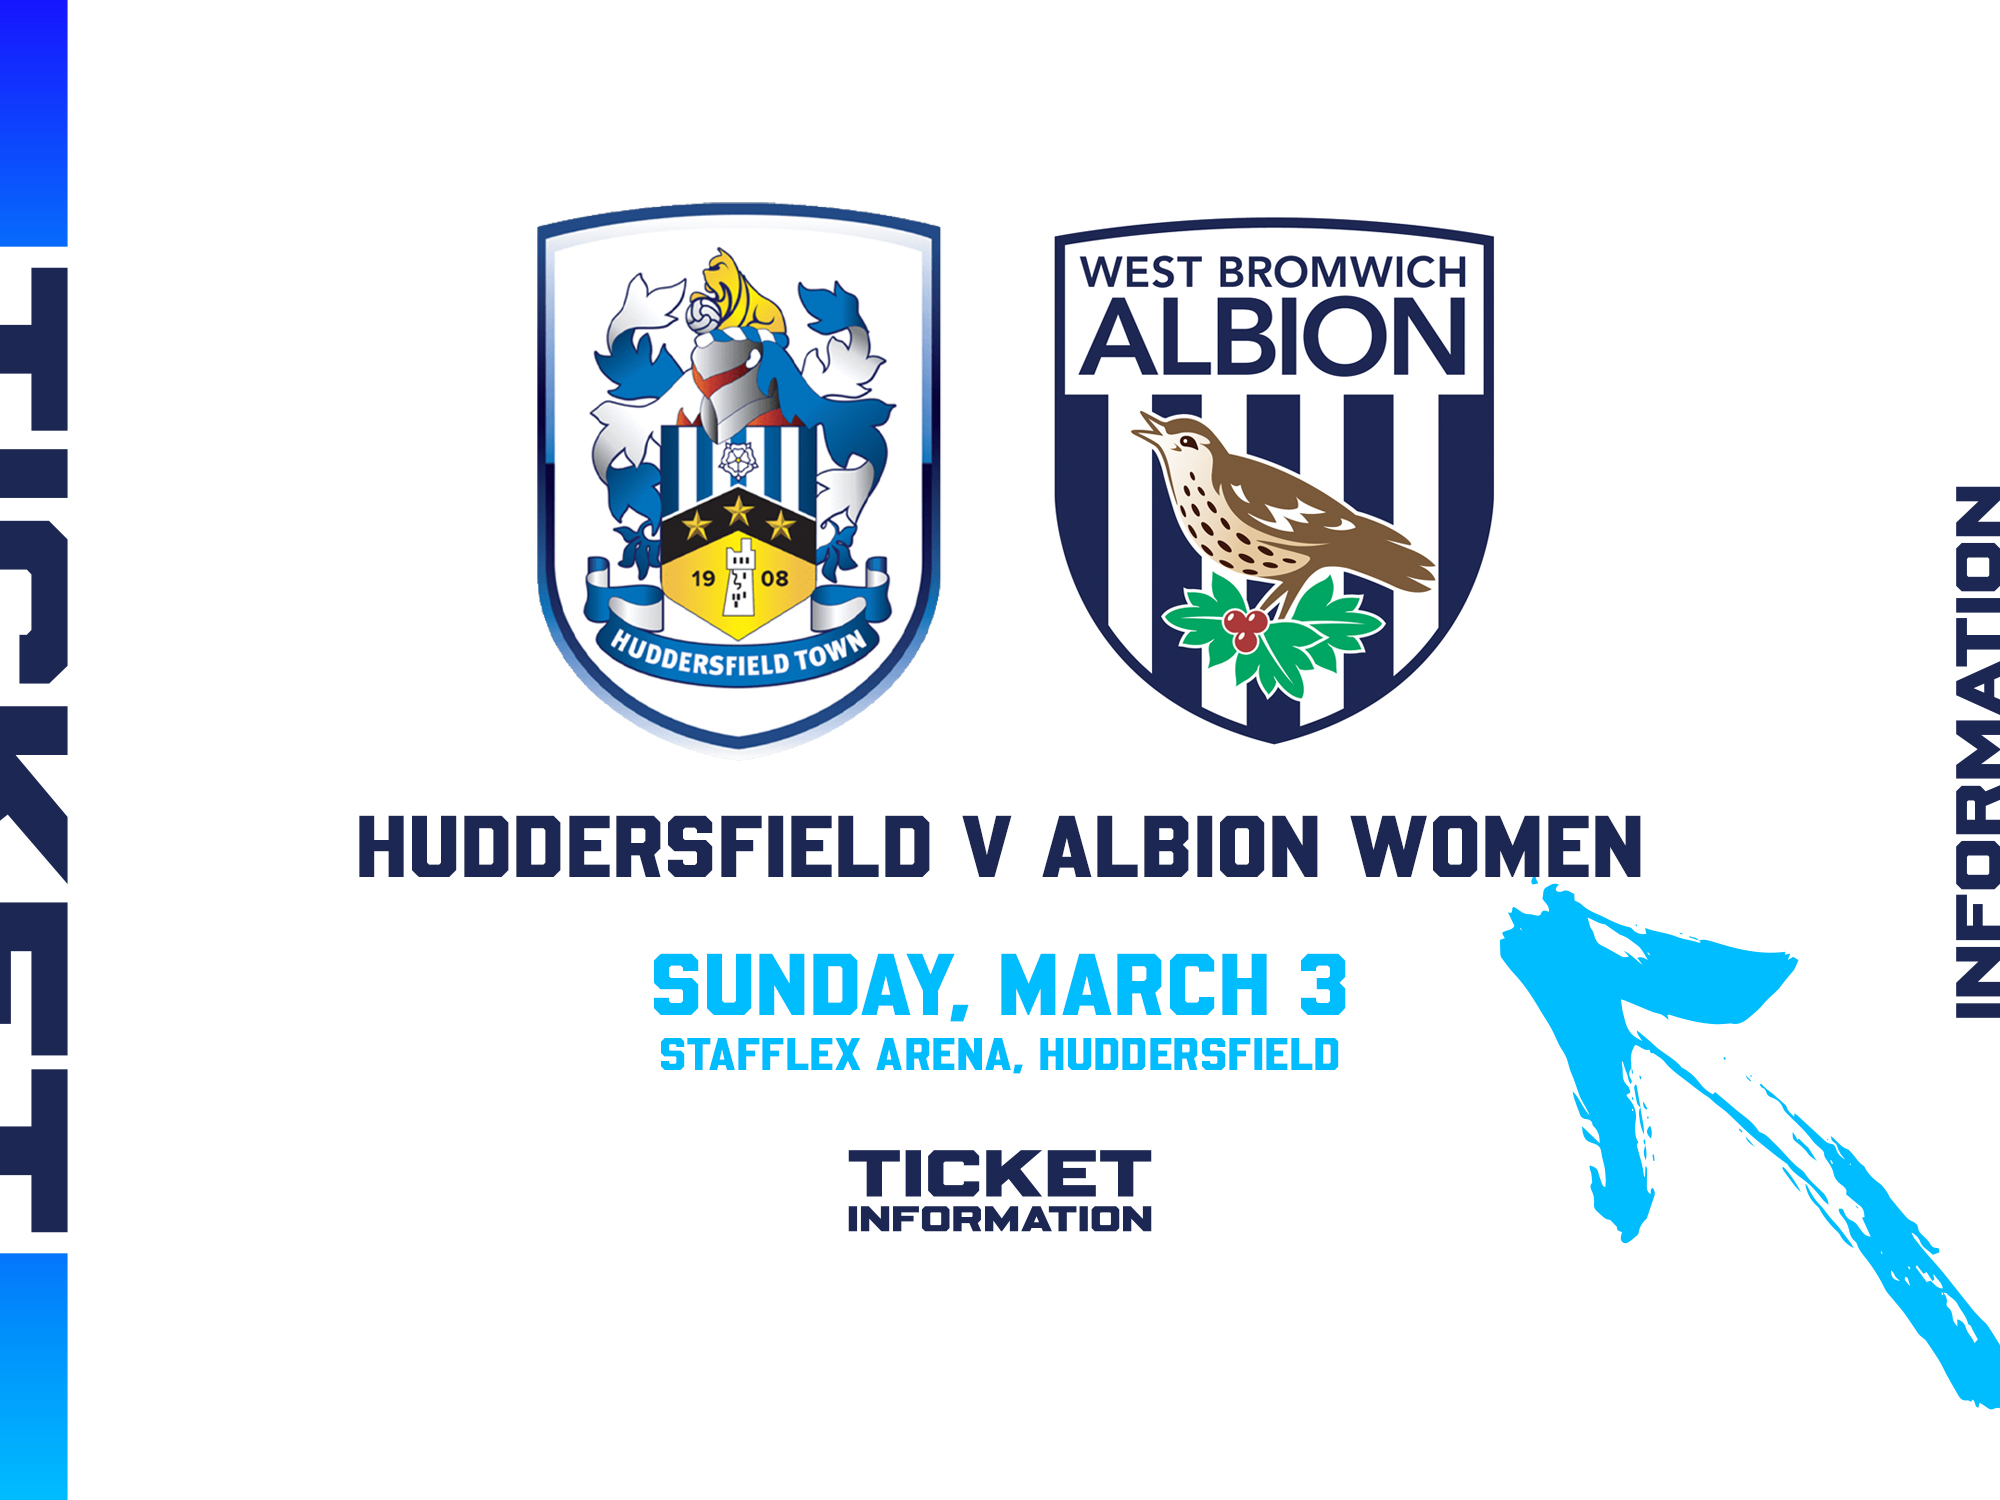 A graphic displaying information for Albion Women's game at Huddersfield